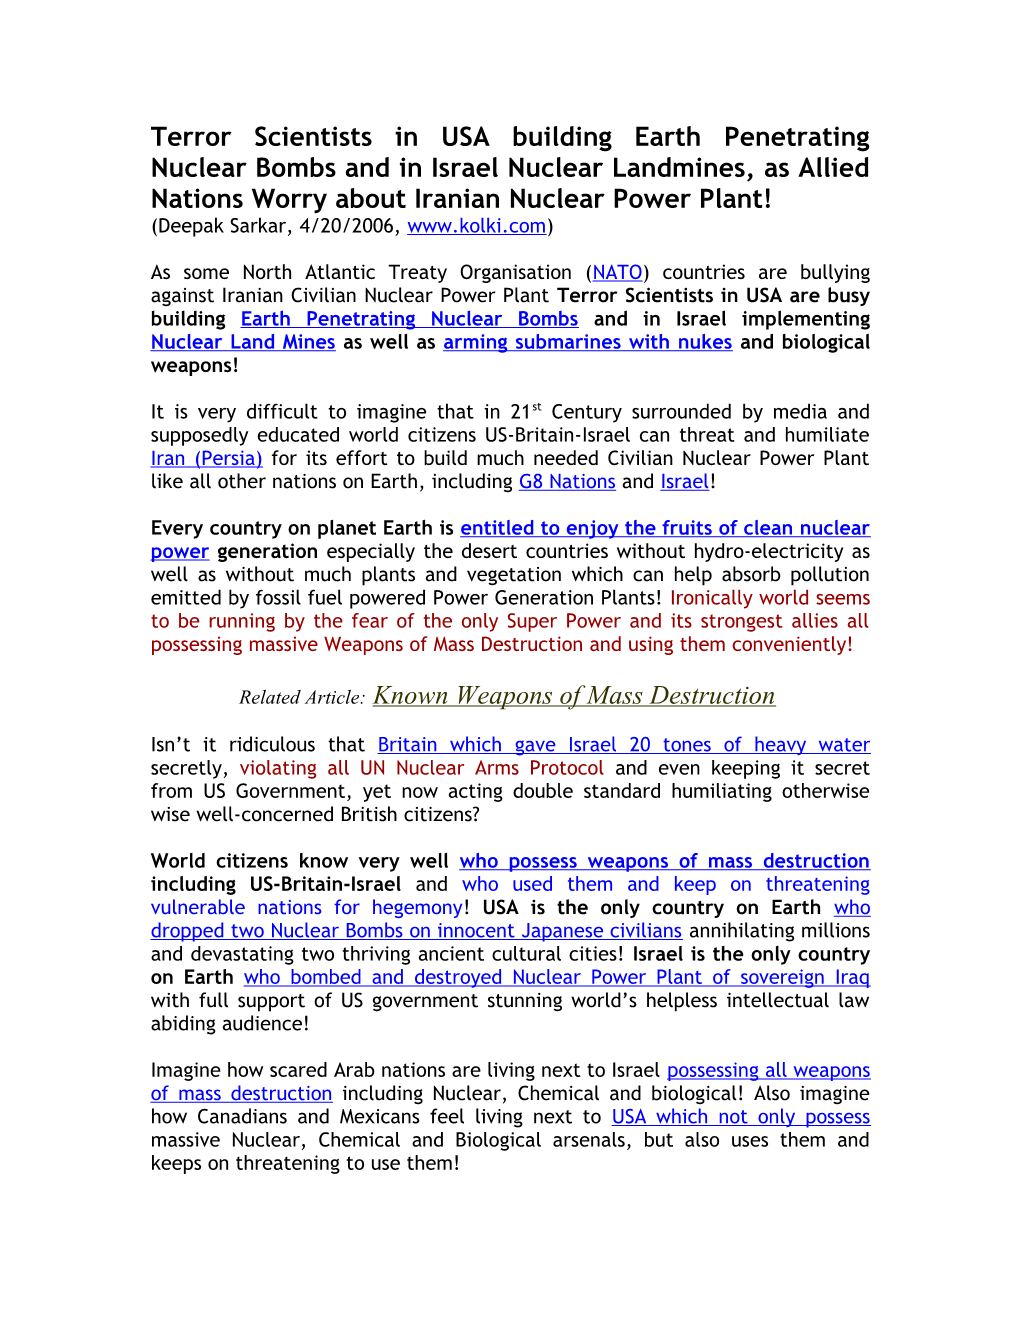 Terror Scientists in USA Building Earth Penetrating Nuclear Bombs and in Israel Nuclear